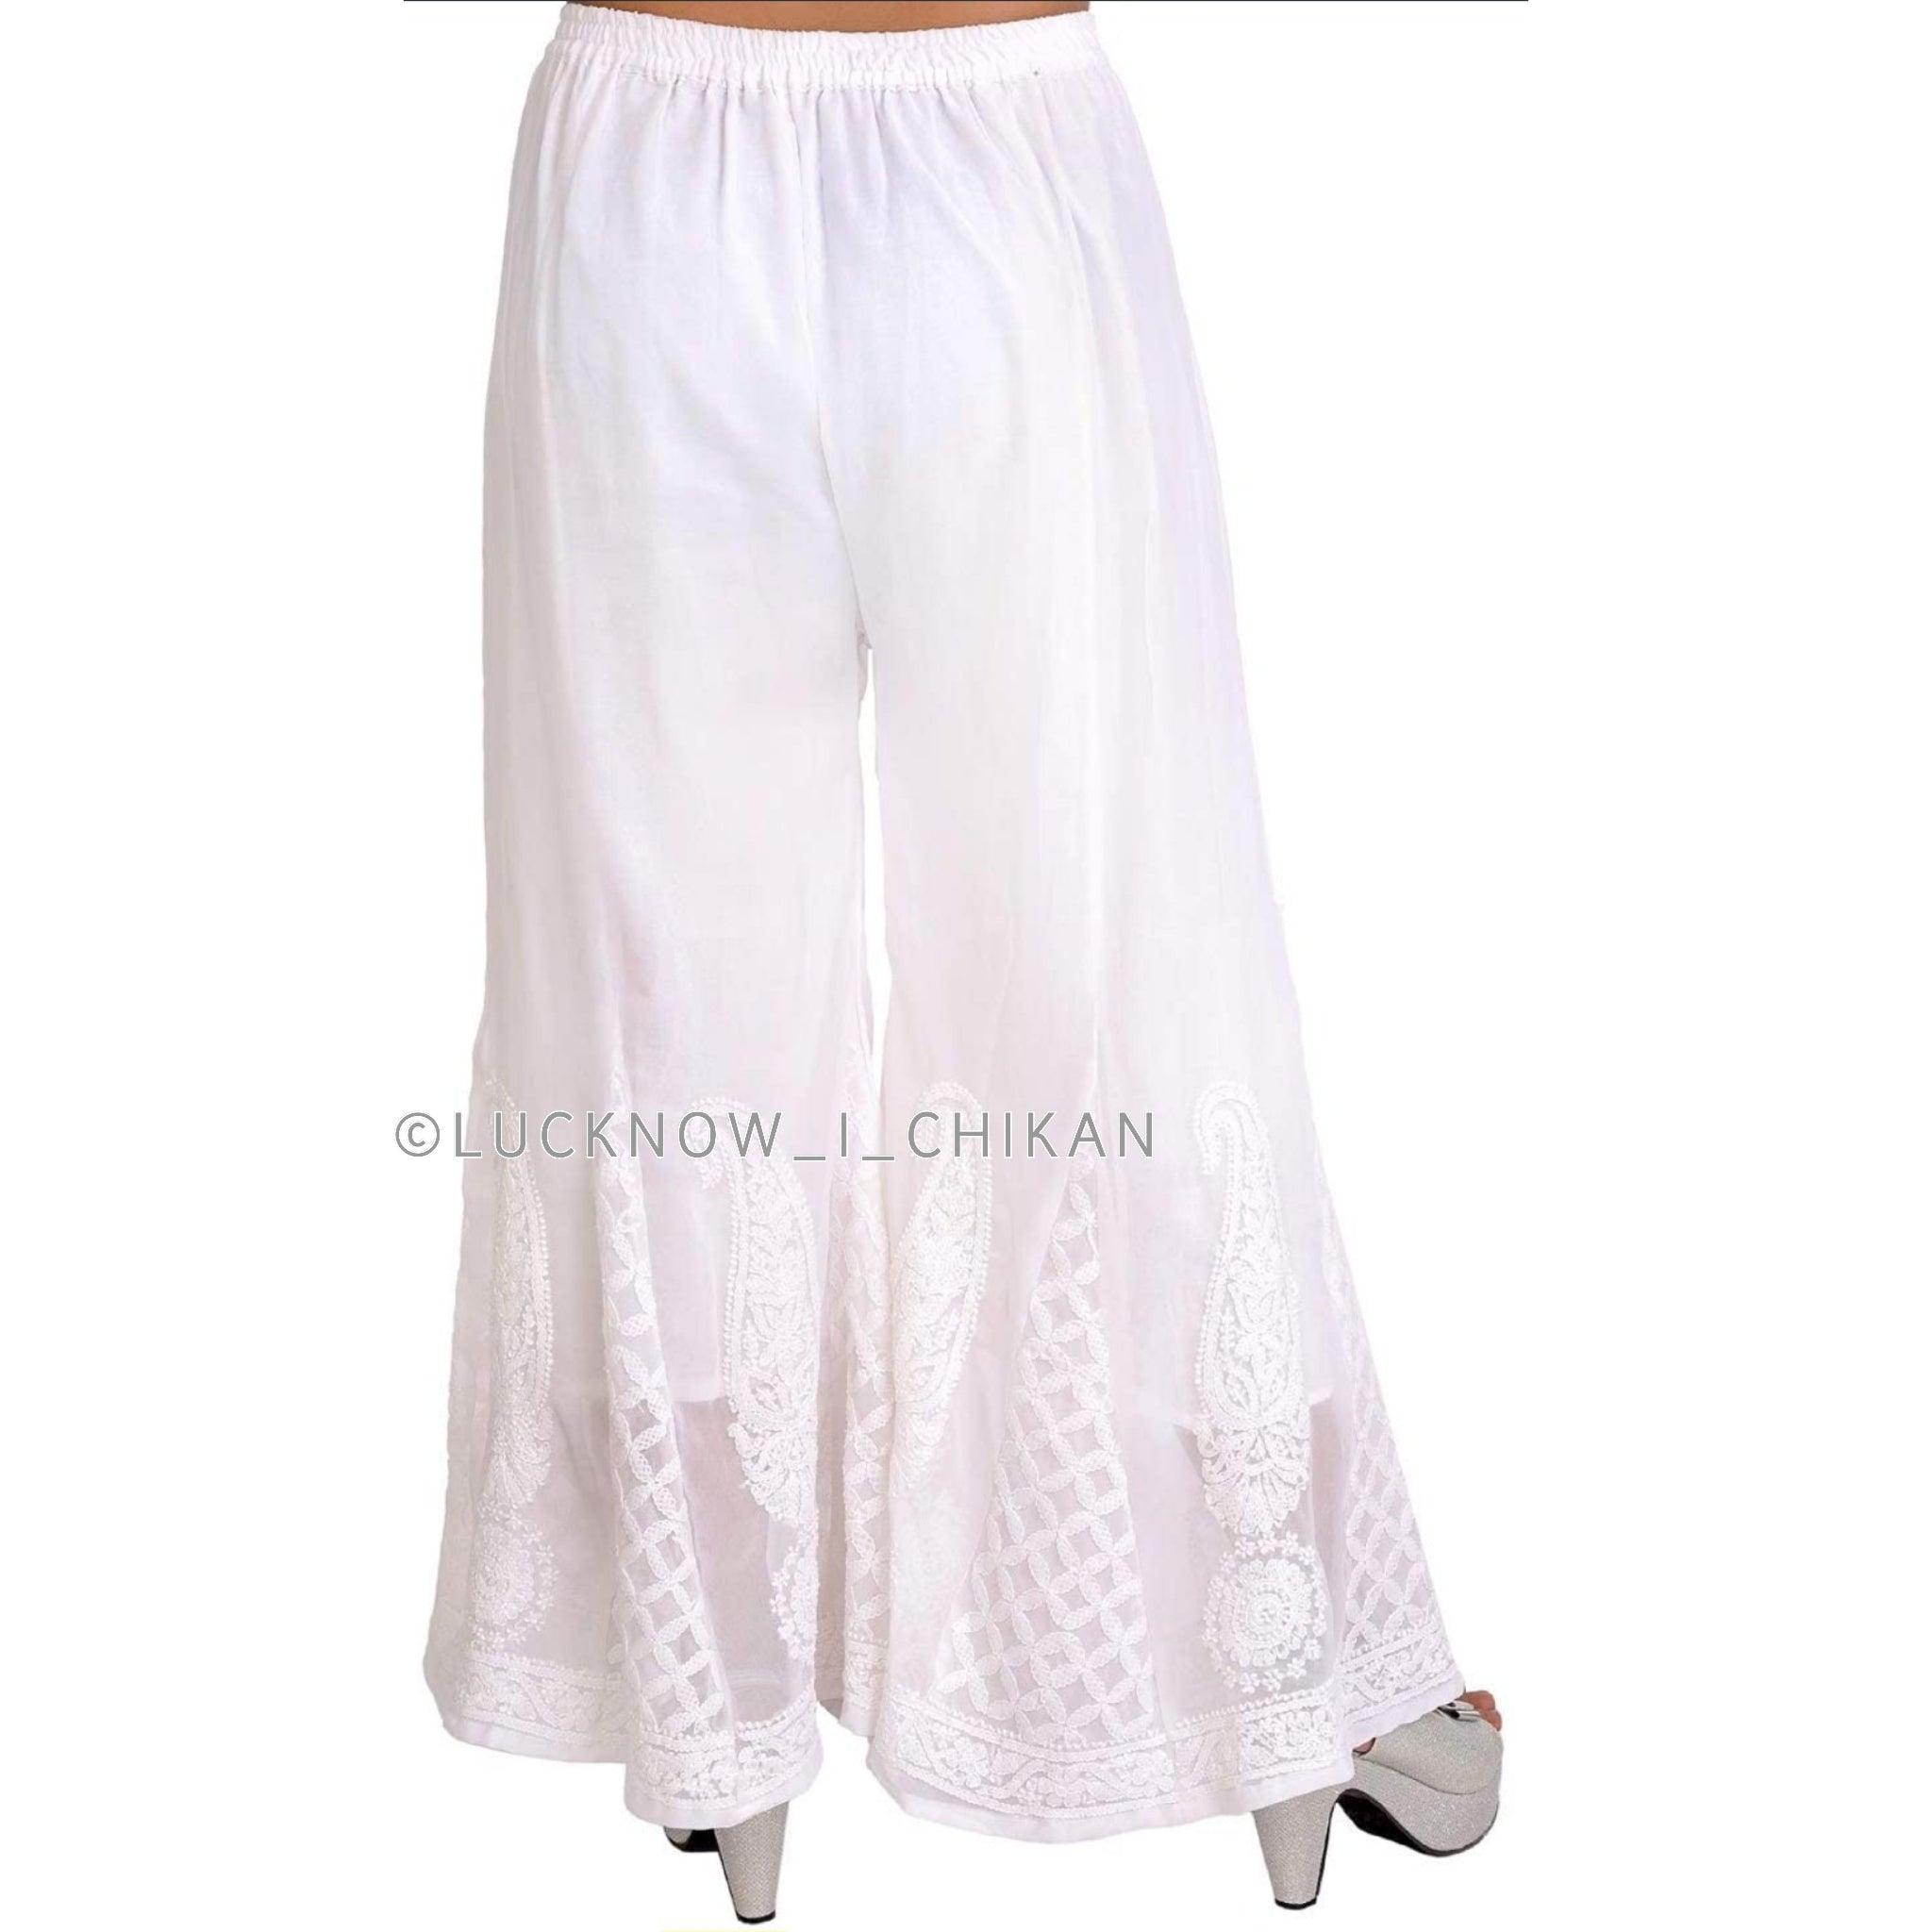 Modnic - Nothing as perfect as a crisp white sharara pants ✓✓ ⠀⠀⠀⠀⠀⠀⠀⠀⠀  #modnicstyle #styleinspiration | Facebook